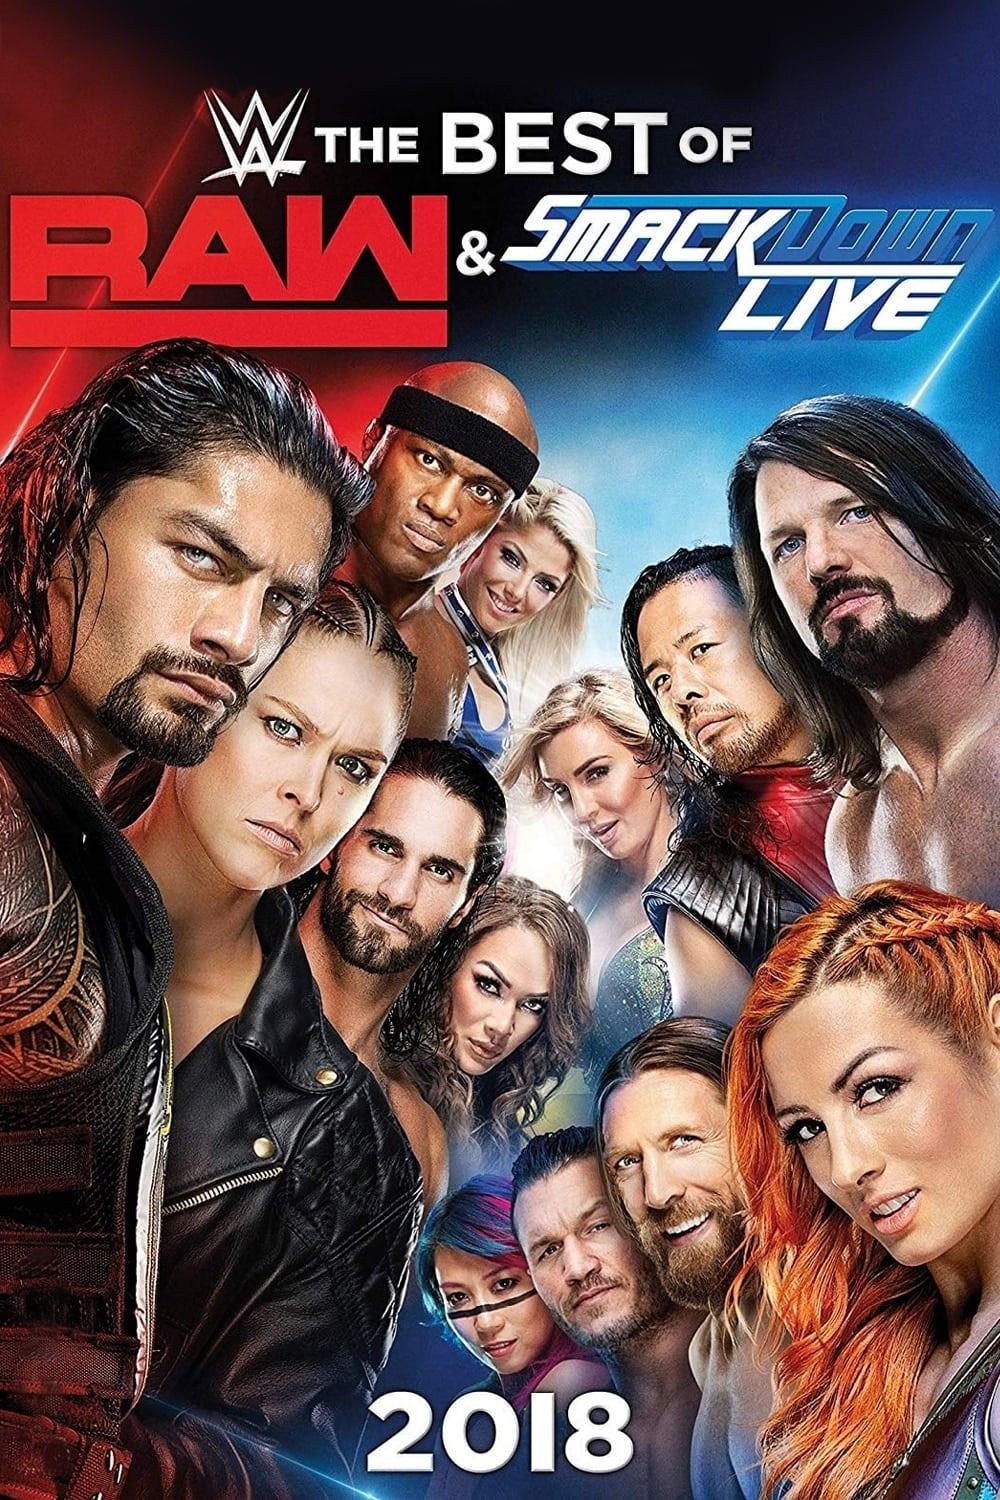 WWE The Best of Raw and Smackdown Live 2018 poster